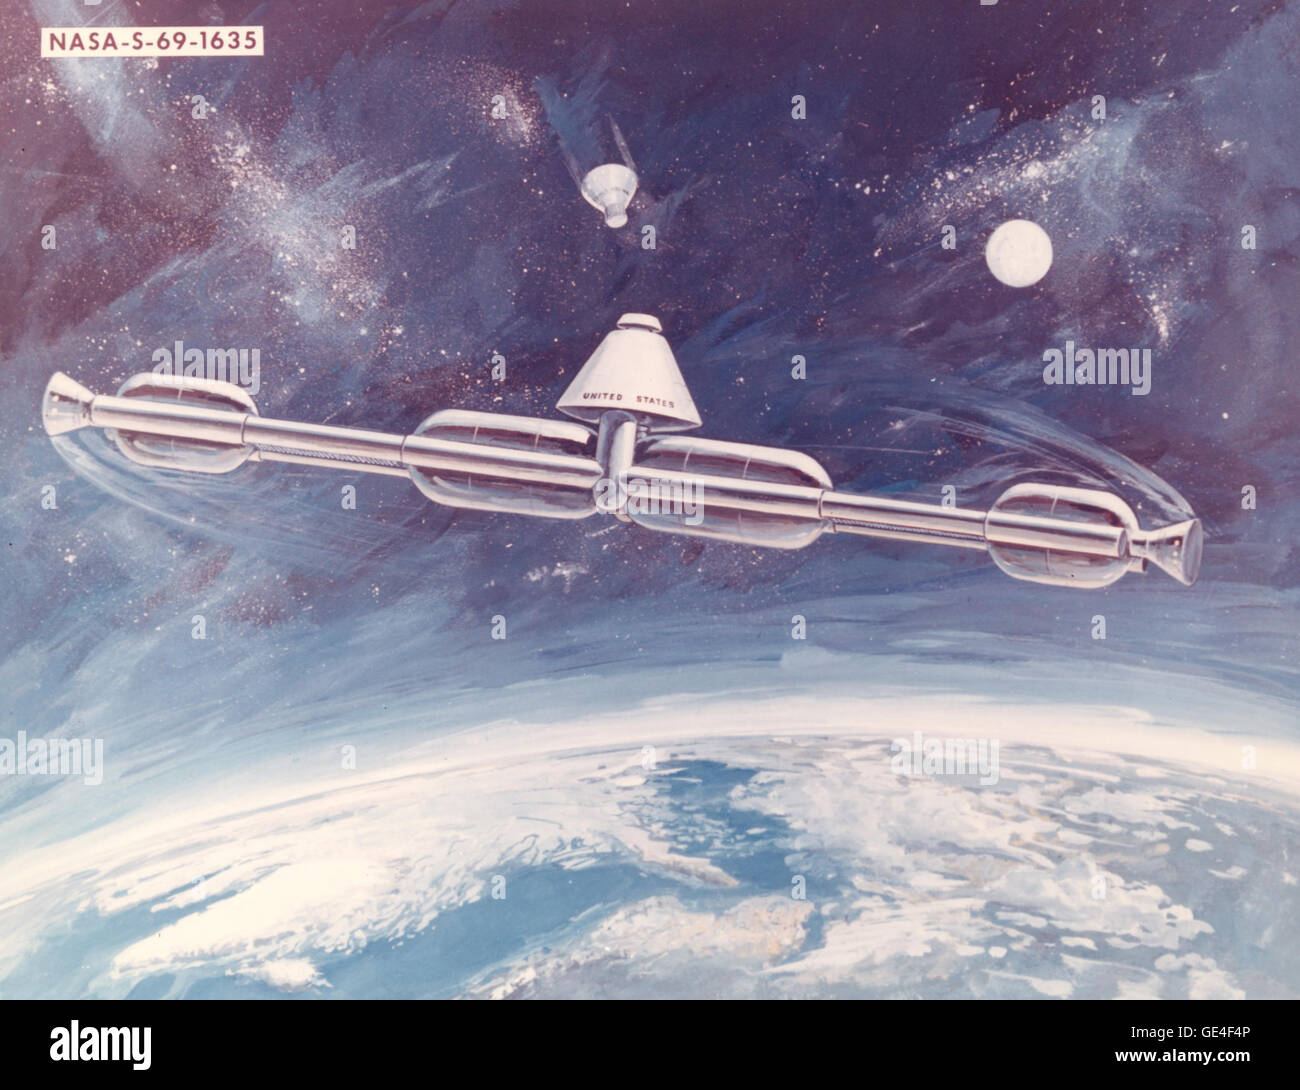 A 1969 station concept. The station was to rotate on its central axis to produce artificial gravity. The majority of early space station concepts created artificial gravity one way or another in order to simulate a more natural or familiar environment for the health of the astronauts. After returning from a micro-gravity environment, astronauts find their muscles weak because they have not been using them. Long-term exposure to micro-gravity could generate long-term health problems for astronauts who do not utilize their muscles. This is why there are exercise machines on space shuttles and on Stock Photo